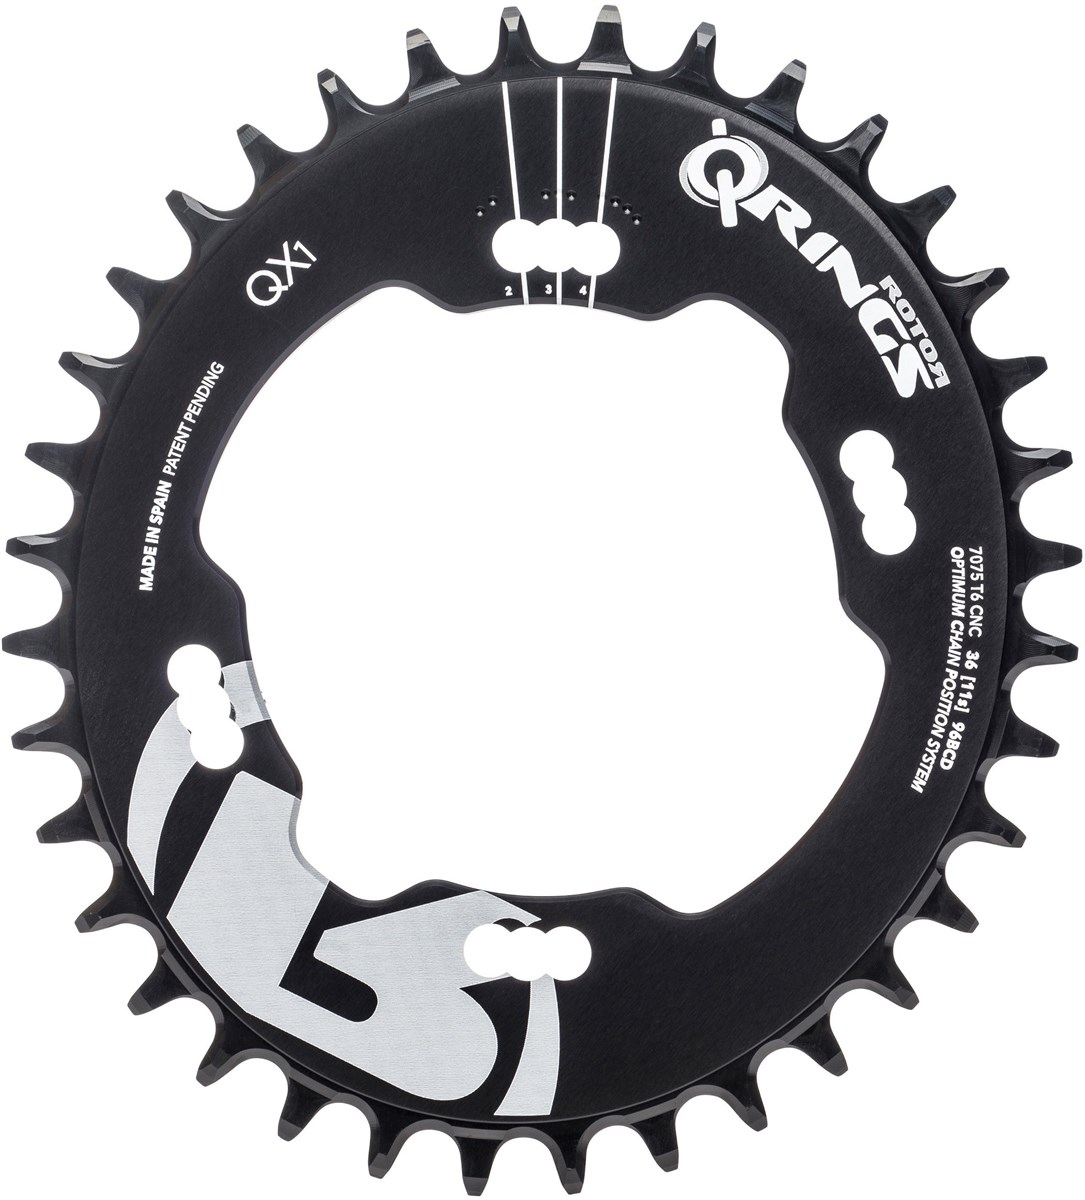 Rotor QX1 XTR 9000 BCD 96 Chainring product image